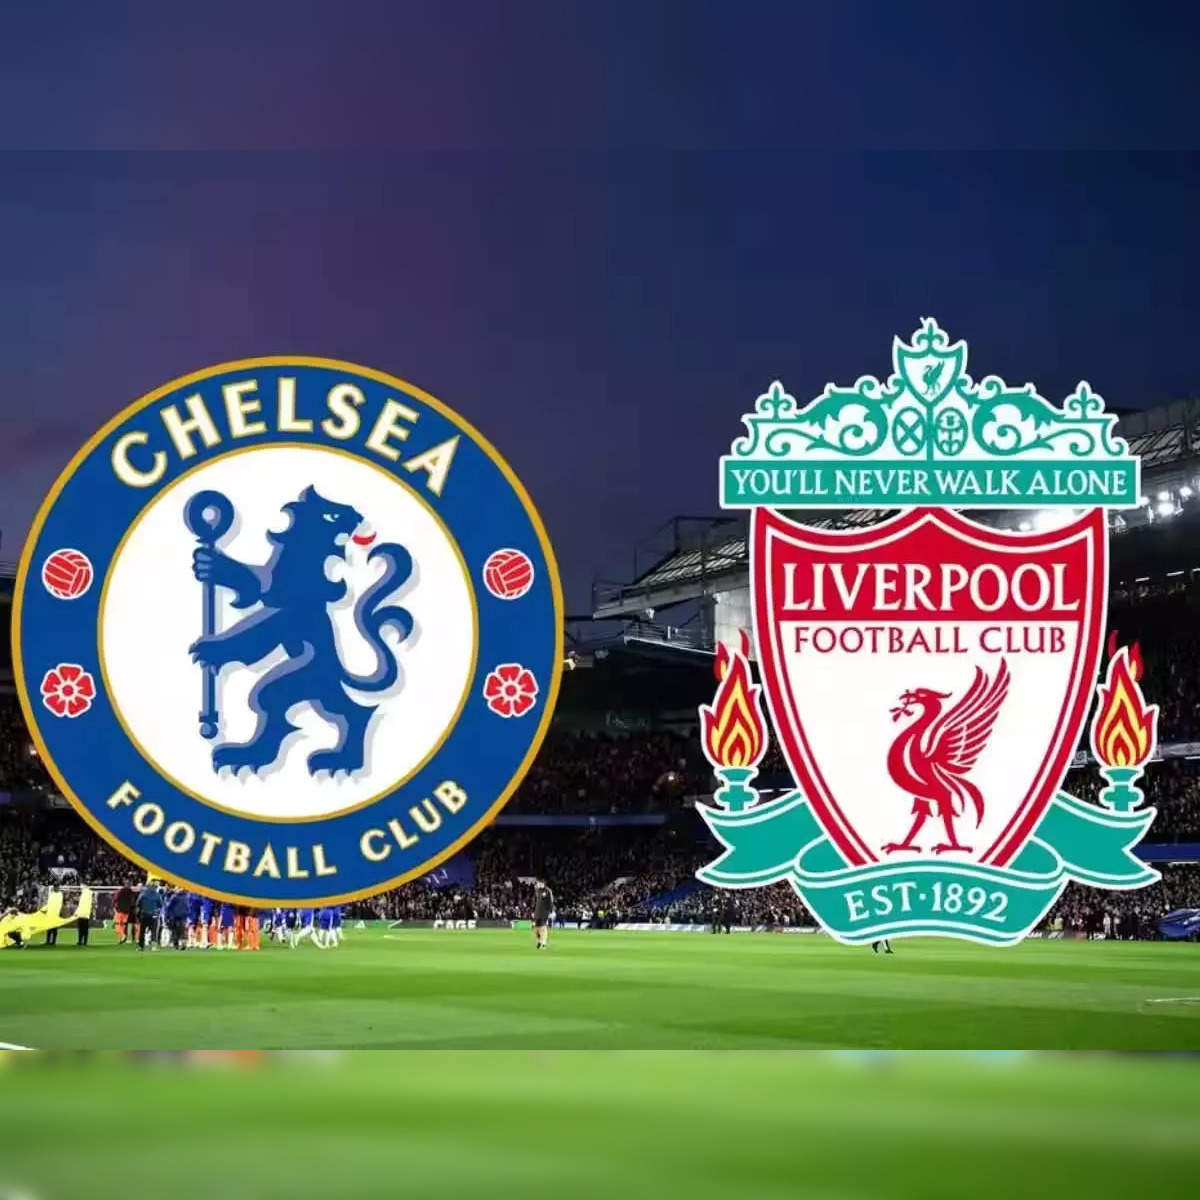 Chelsea vs Liverpool live streaming Kick off date, time, where to watch Premier League soccer game